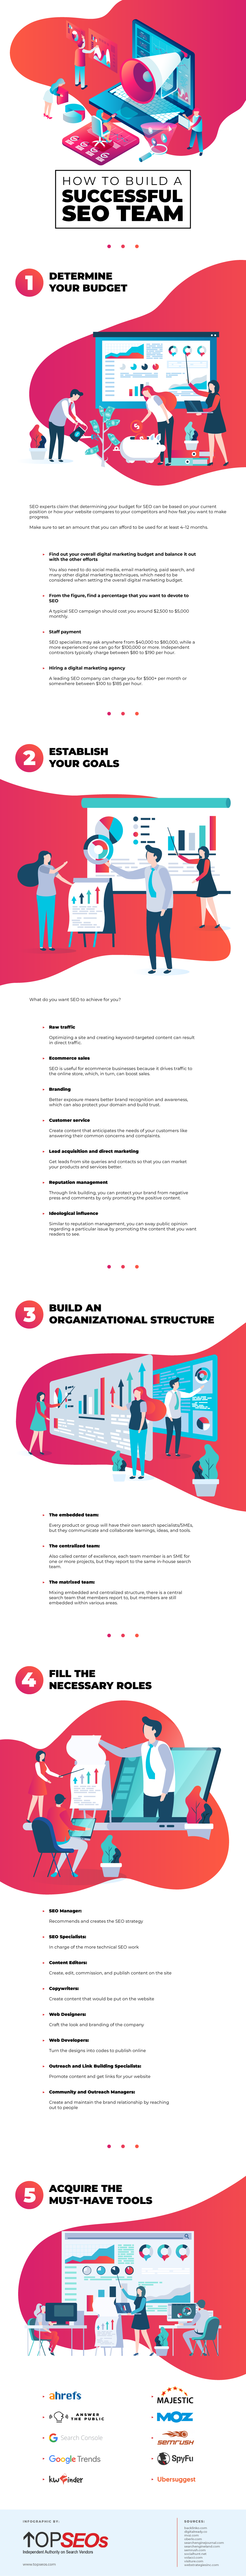 How to Build a Successful SEO Team Infographic